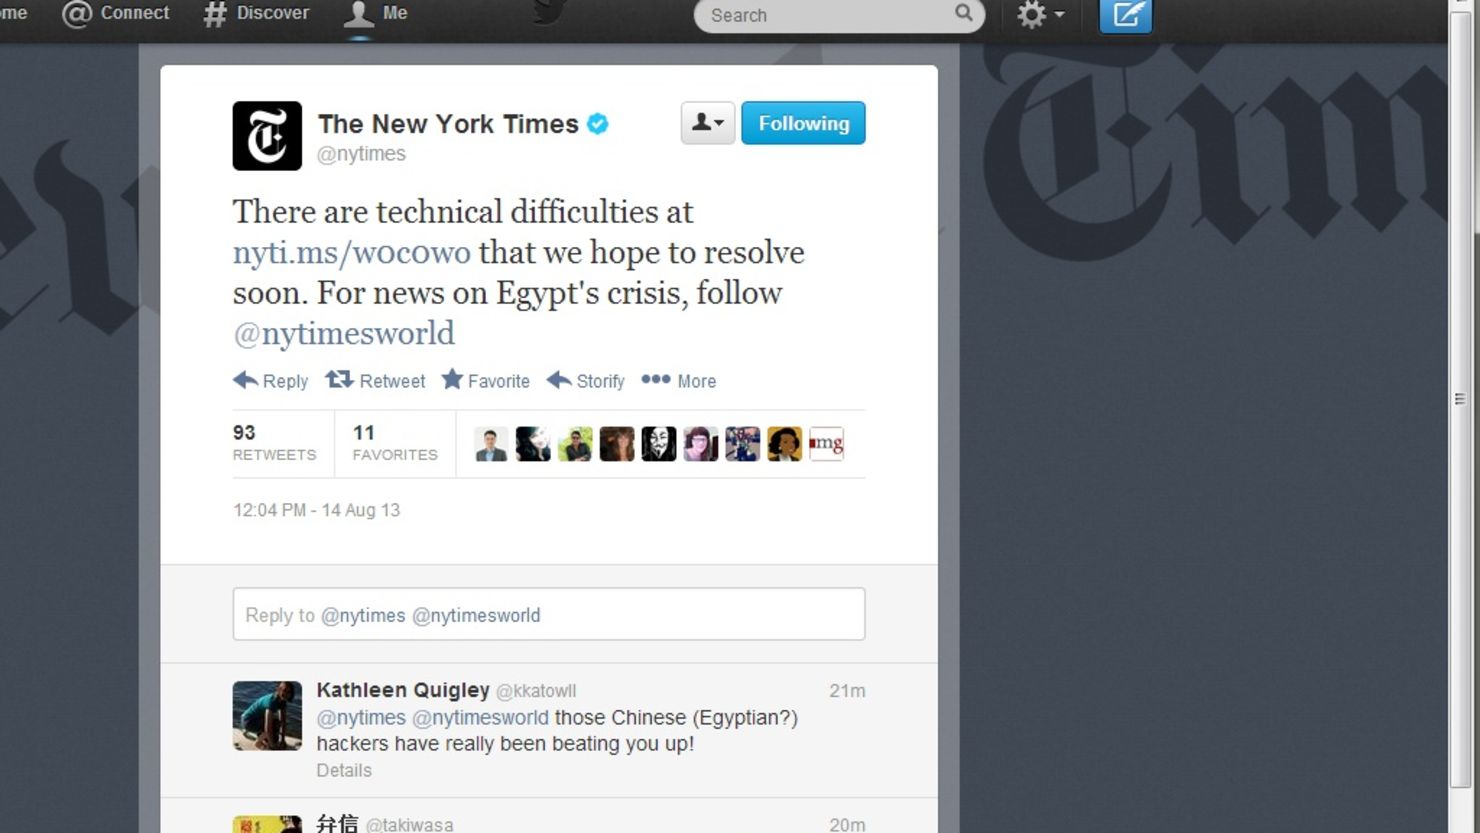 NYTimes outage tweet